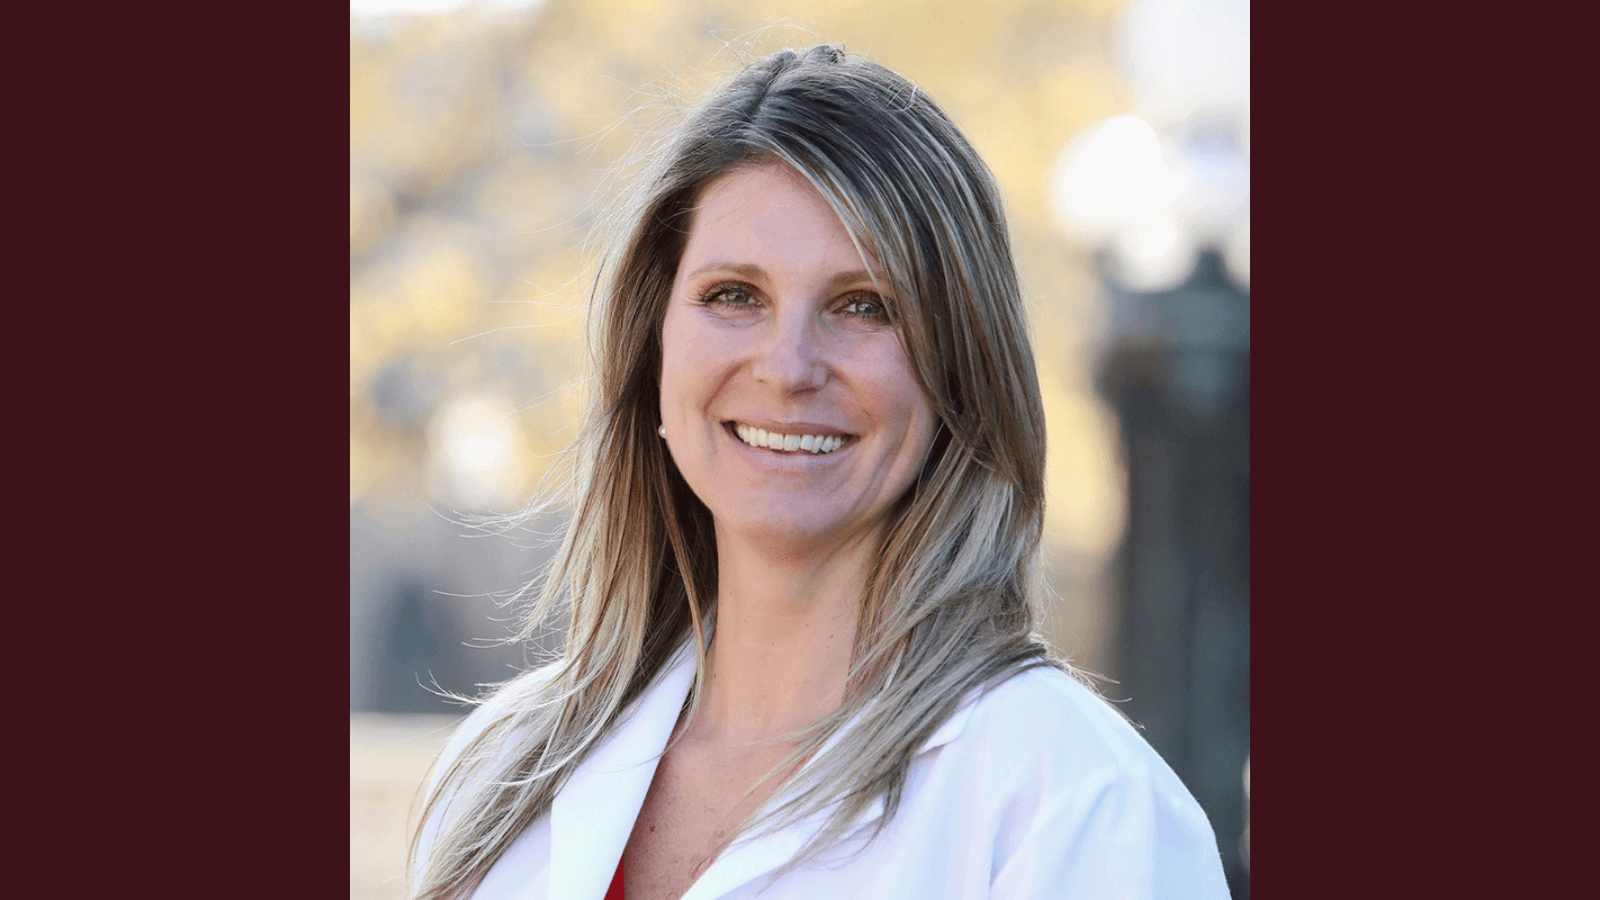 Kristin Lyerly announces bid for 8th Congressional District seat